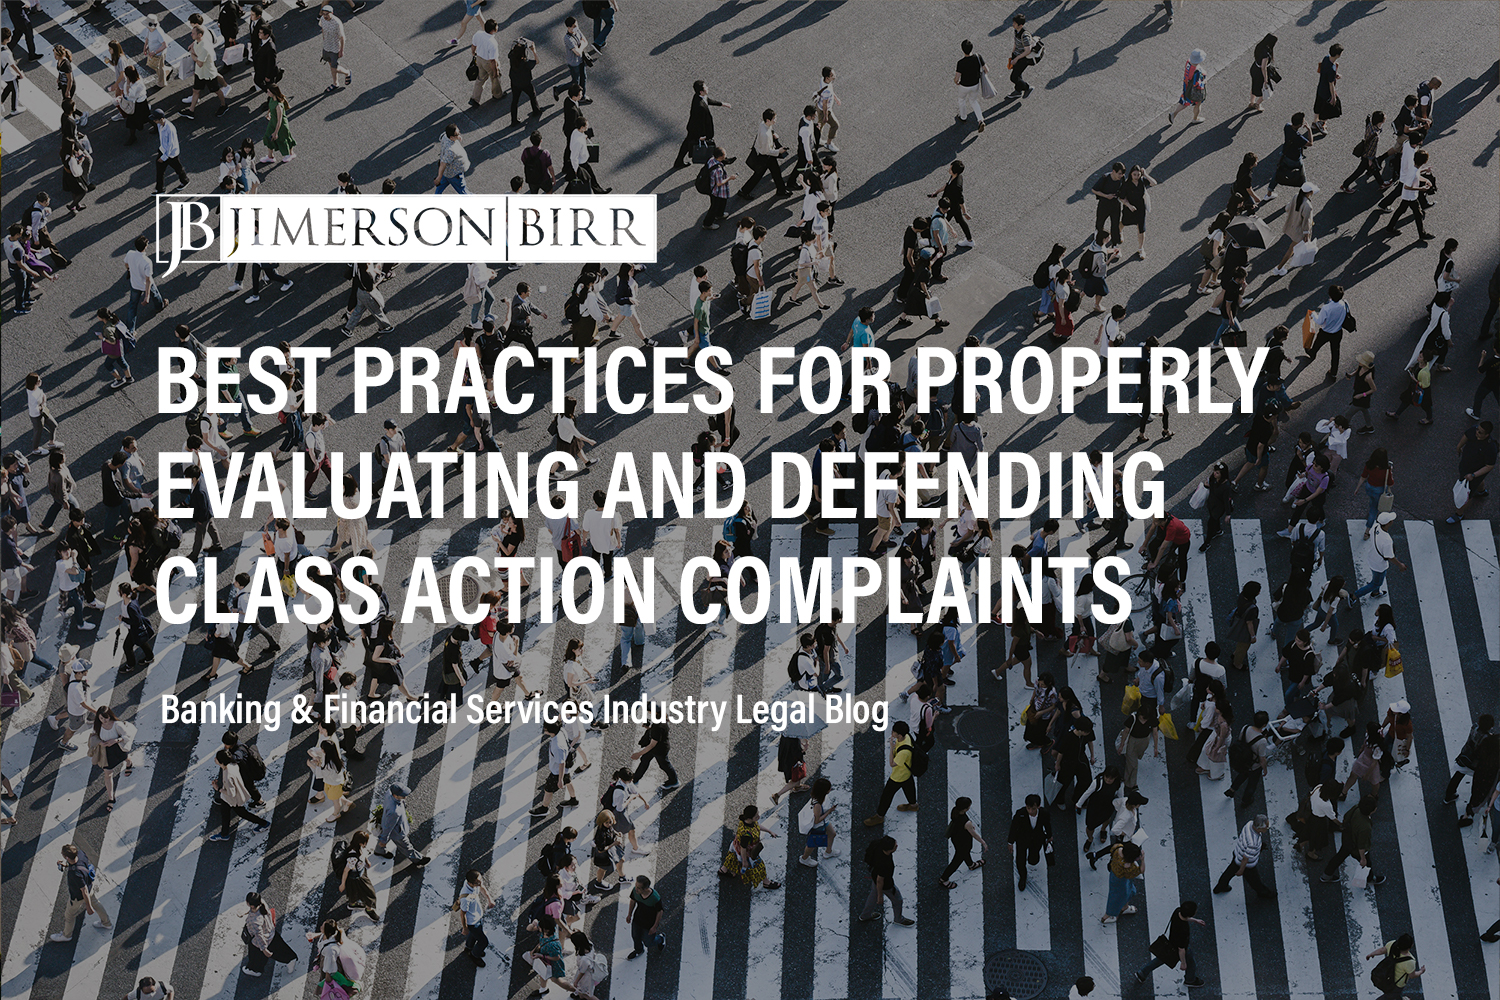 Properly Evaluating and Defending Class Action Complaints